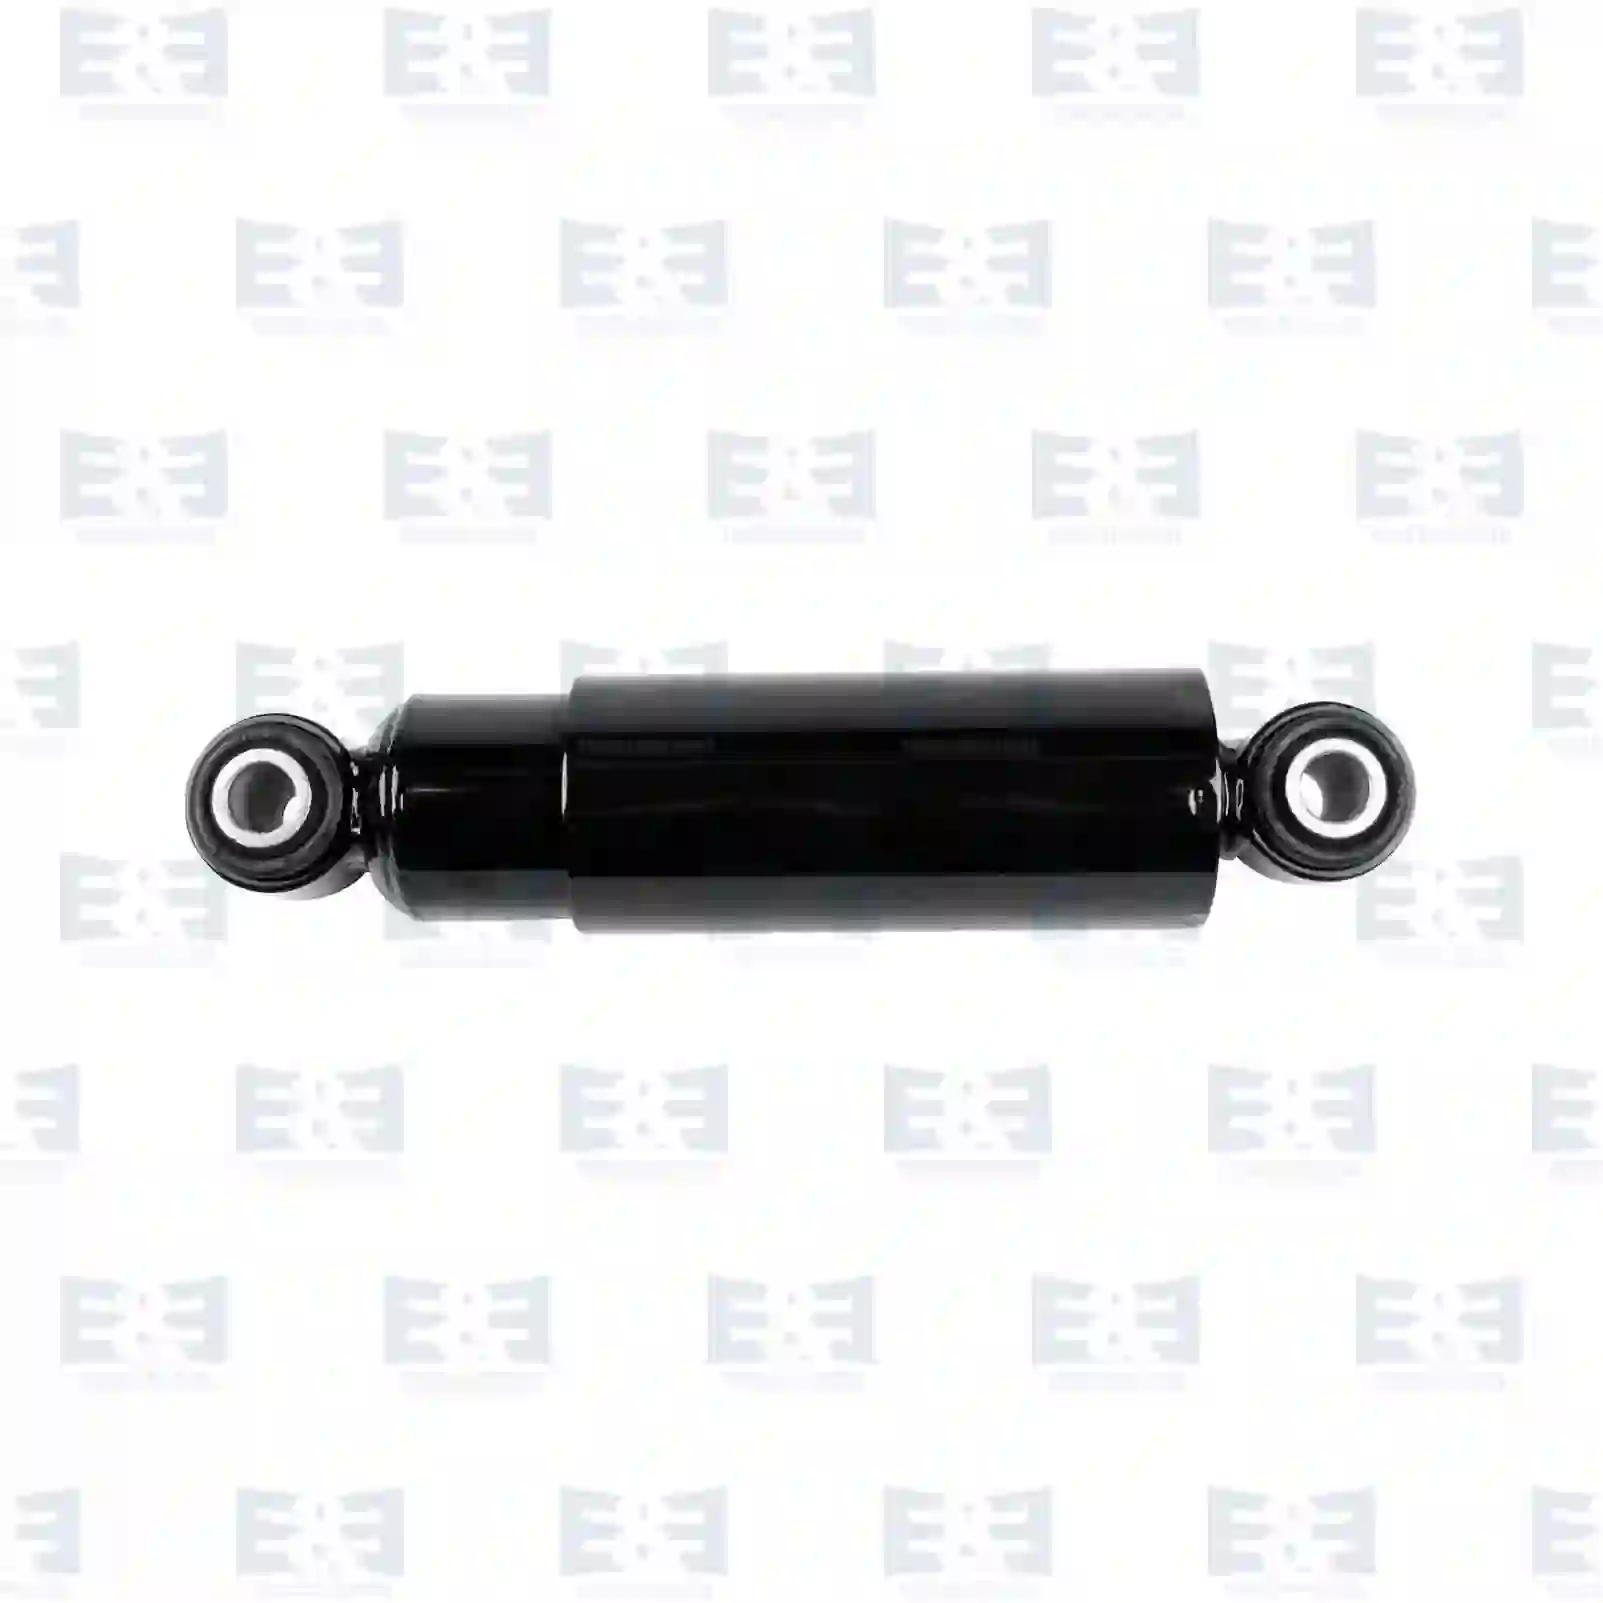 Shock Absorber Shock absorber, EE No 2E2283042 ,  oem no:500900, 1336826, 6506636B, 902229, 9463260200, 5000786728, 8404174, 2376001001, 2376001002, 2376001400, 2376001500, 2376002900, 3376000800, 001737, 005031, 012486, 014134, 014856, 016436, 902398, 912398, 912637, 2376001800, 6503608, 6504638G, 6506635, 65066368, 6506636B, 2376001001, 3193205 E&E Truck Spare Parts | Truck Spare Parts, Auotomotive Spare Parts